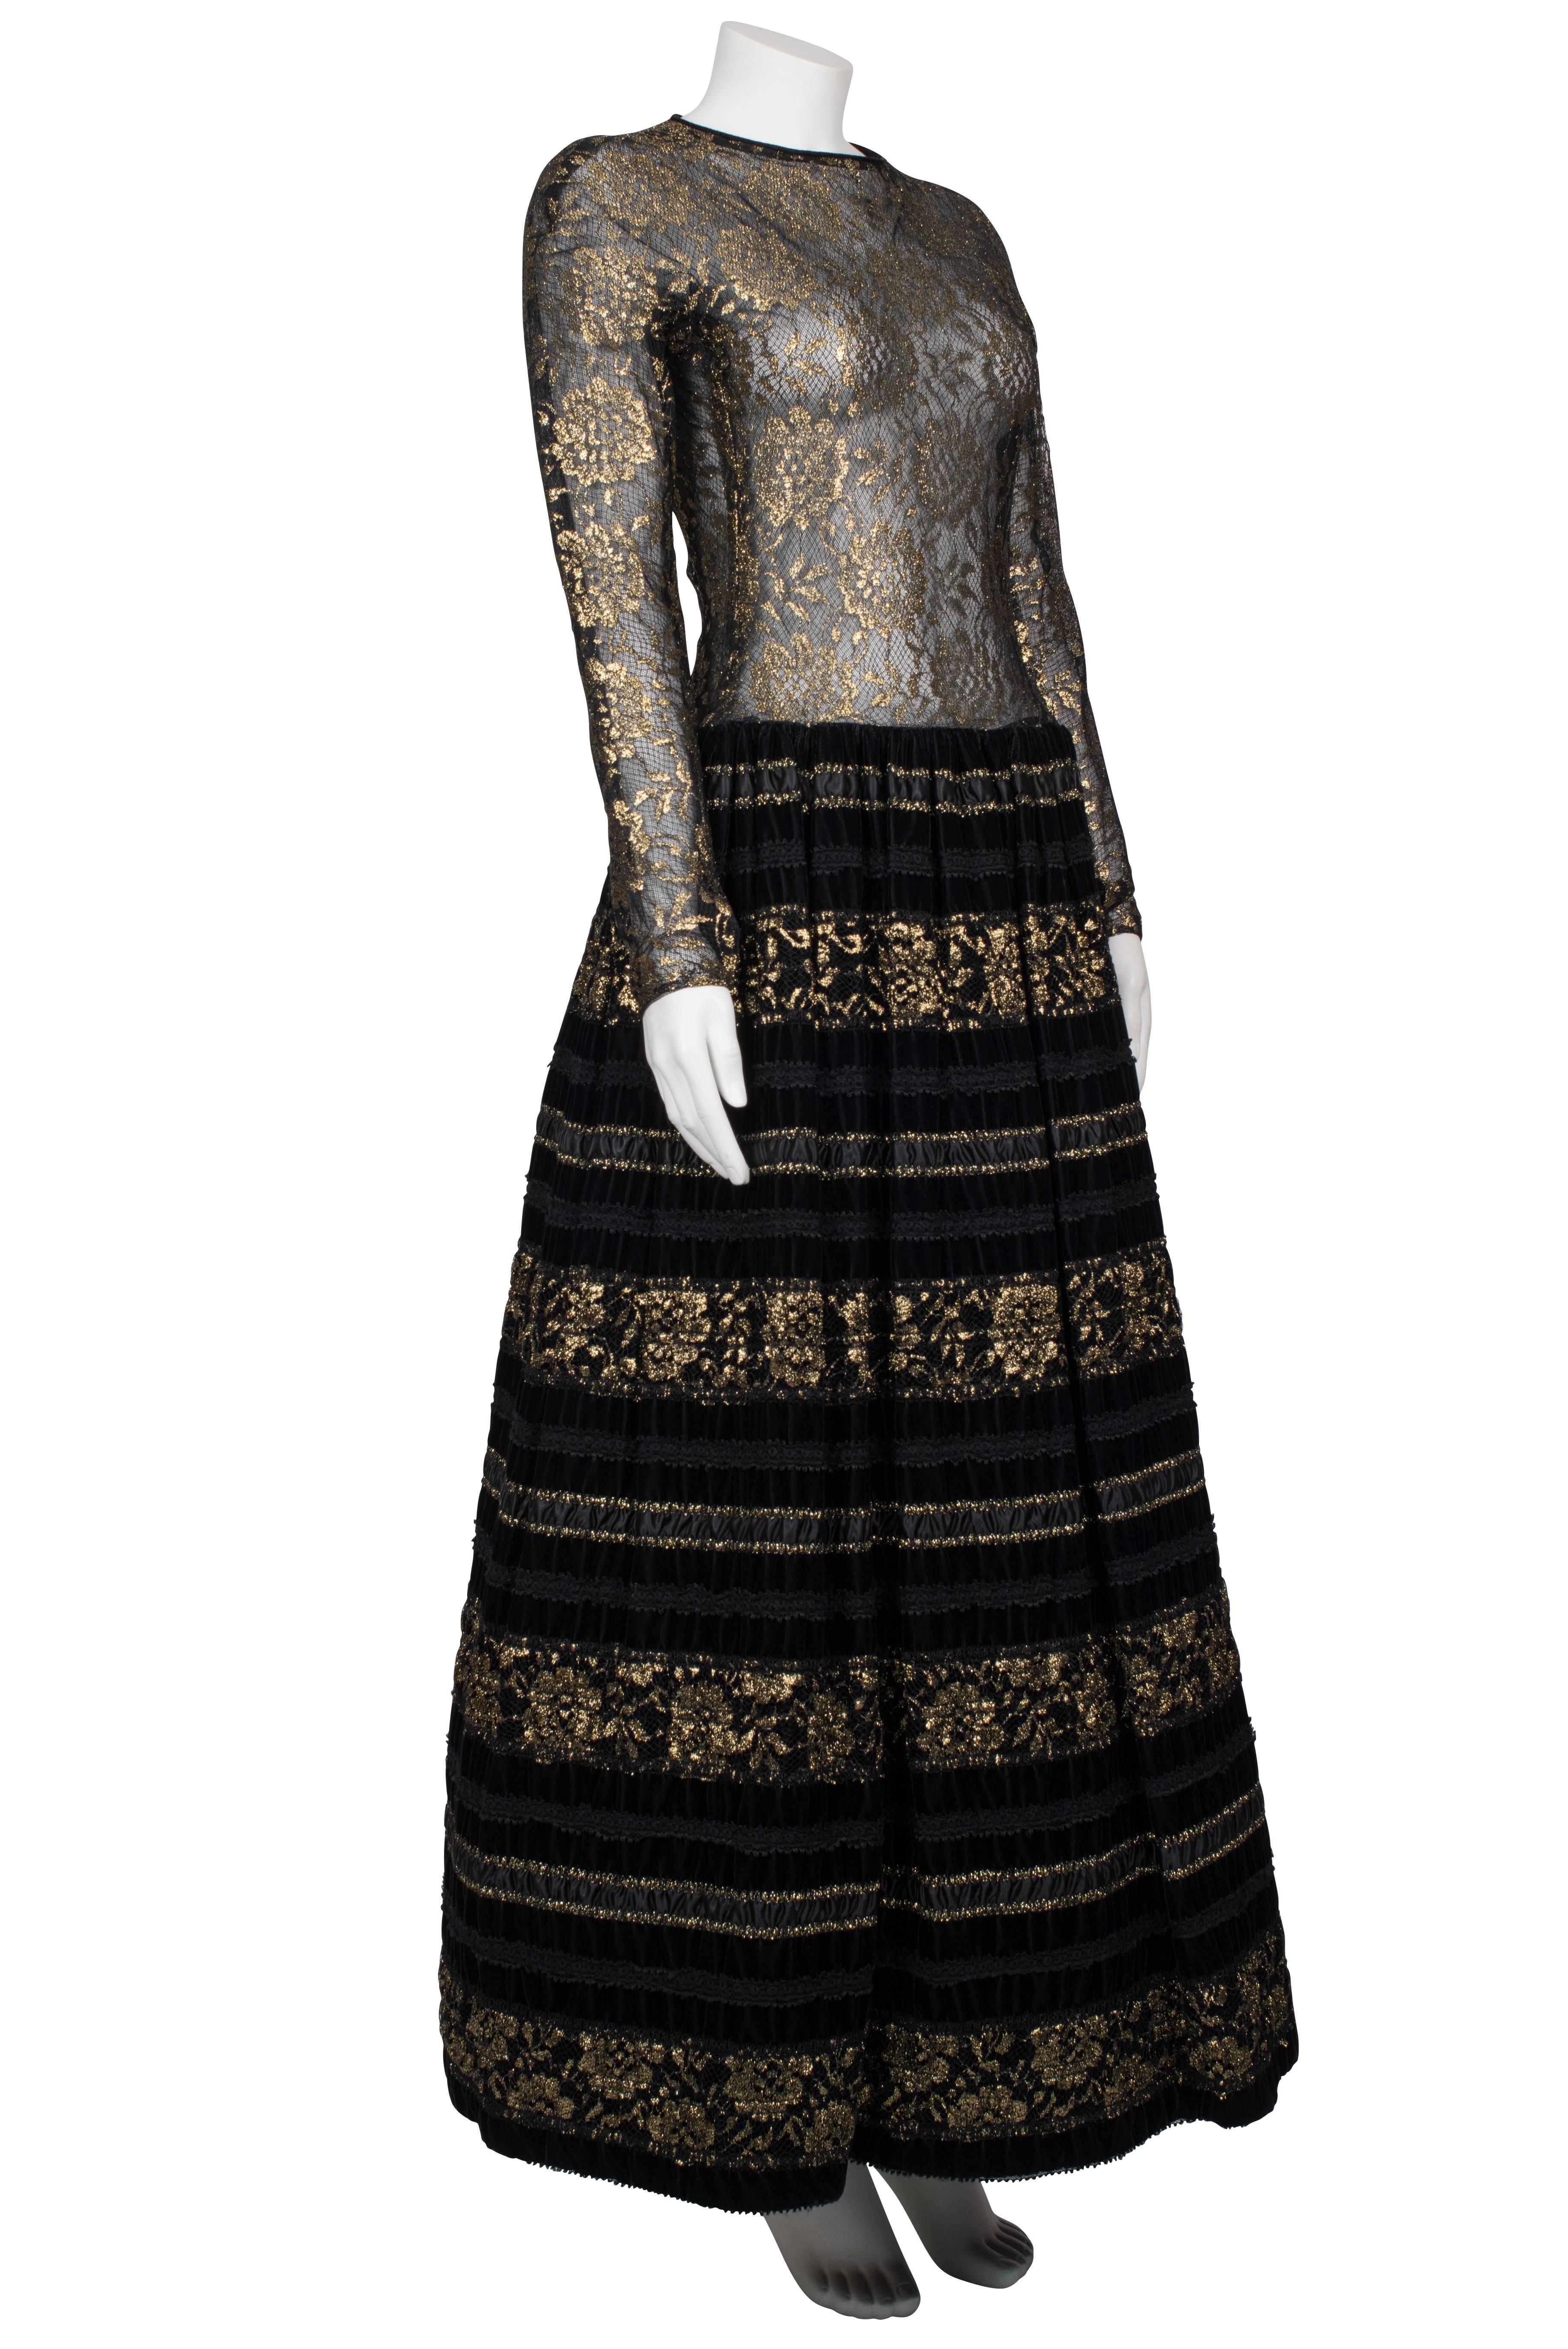 1960's Arnold Scaasi Couture Black & Gold Metallic Lace Gown For Sale 1